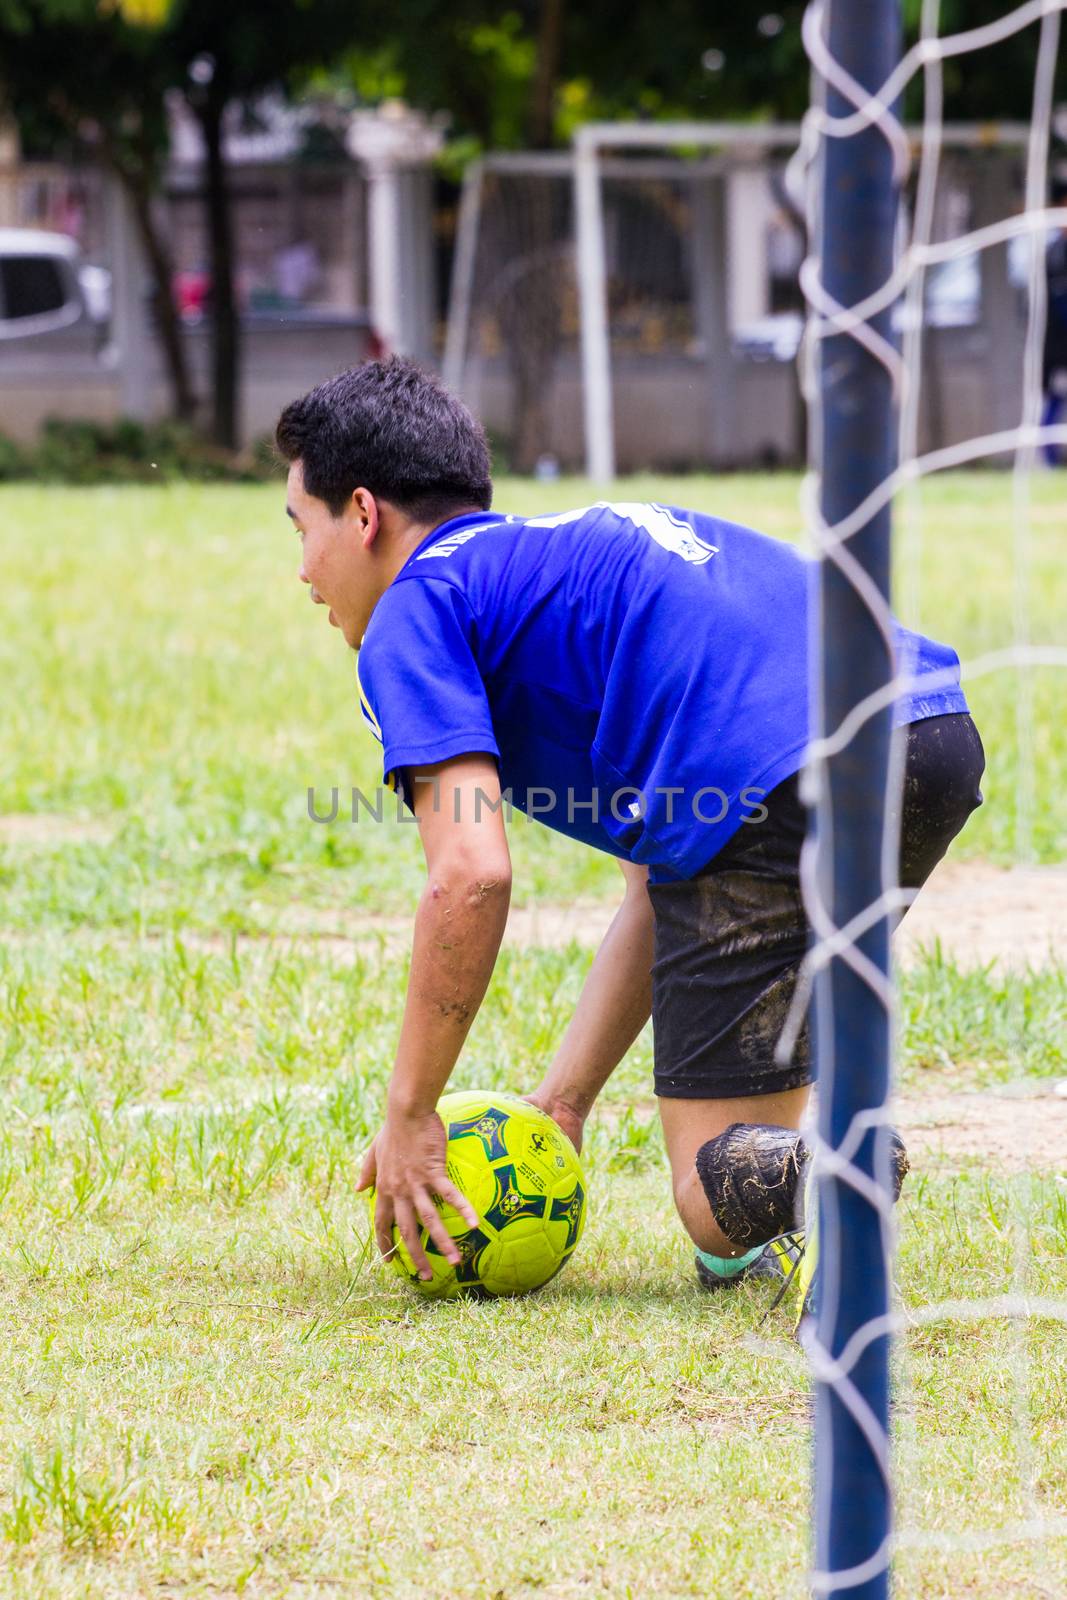 CHIANGRAI, THAILAND - AUG 9: unidentified male teenagers playing soccer in field on August 9, 2014 in Chiangrai, Thailand. Thai teenagers like to exercise by playing sports.